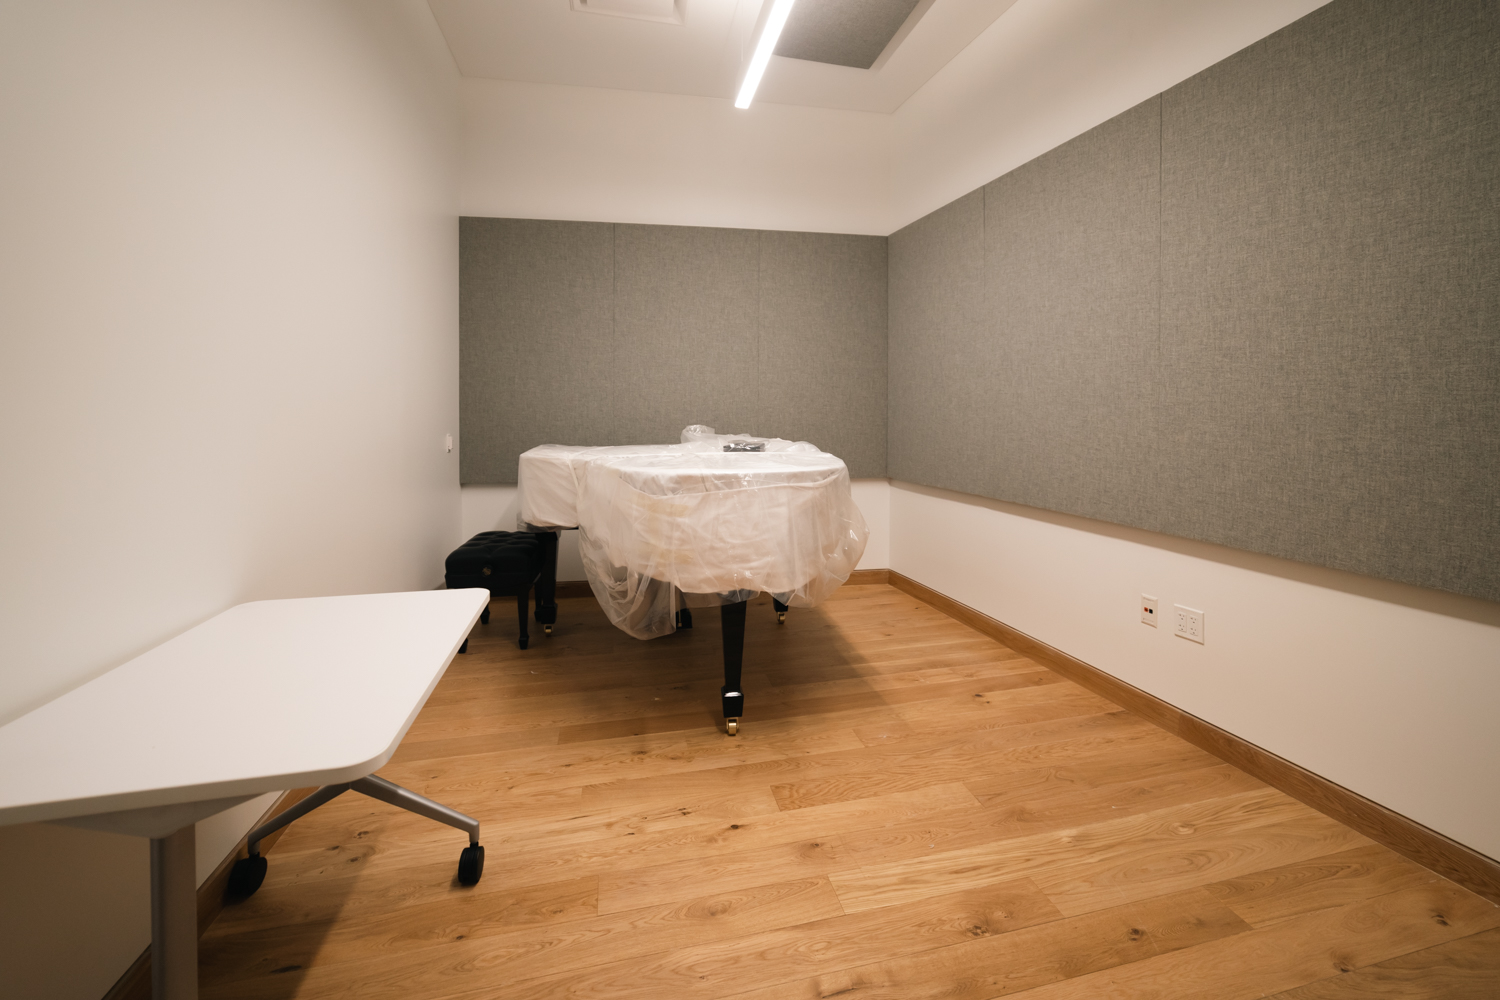 A small room with a grand piano wrapped in white paper placed against a wall. On the wall are gray acoustic panels made of fabric.